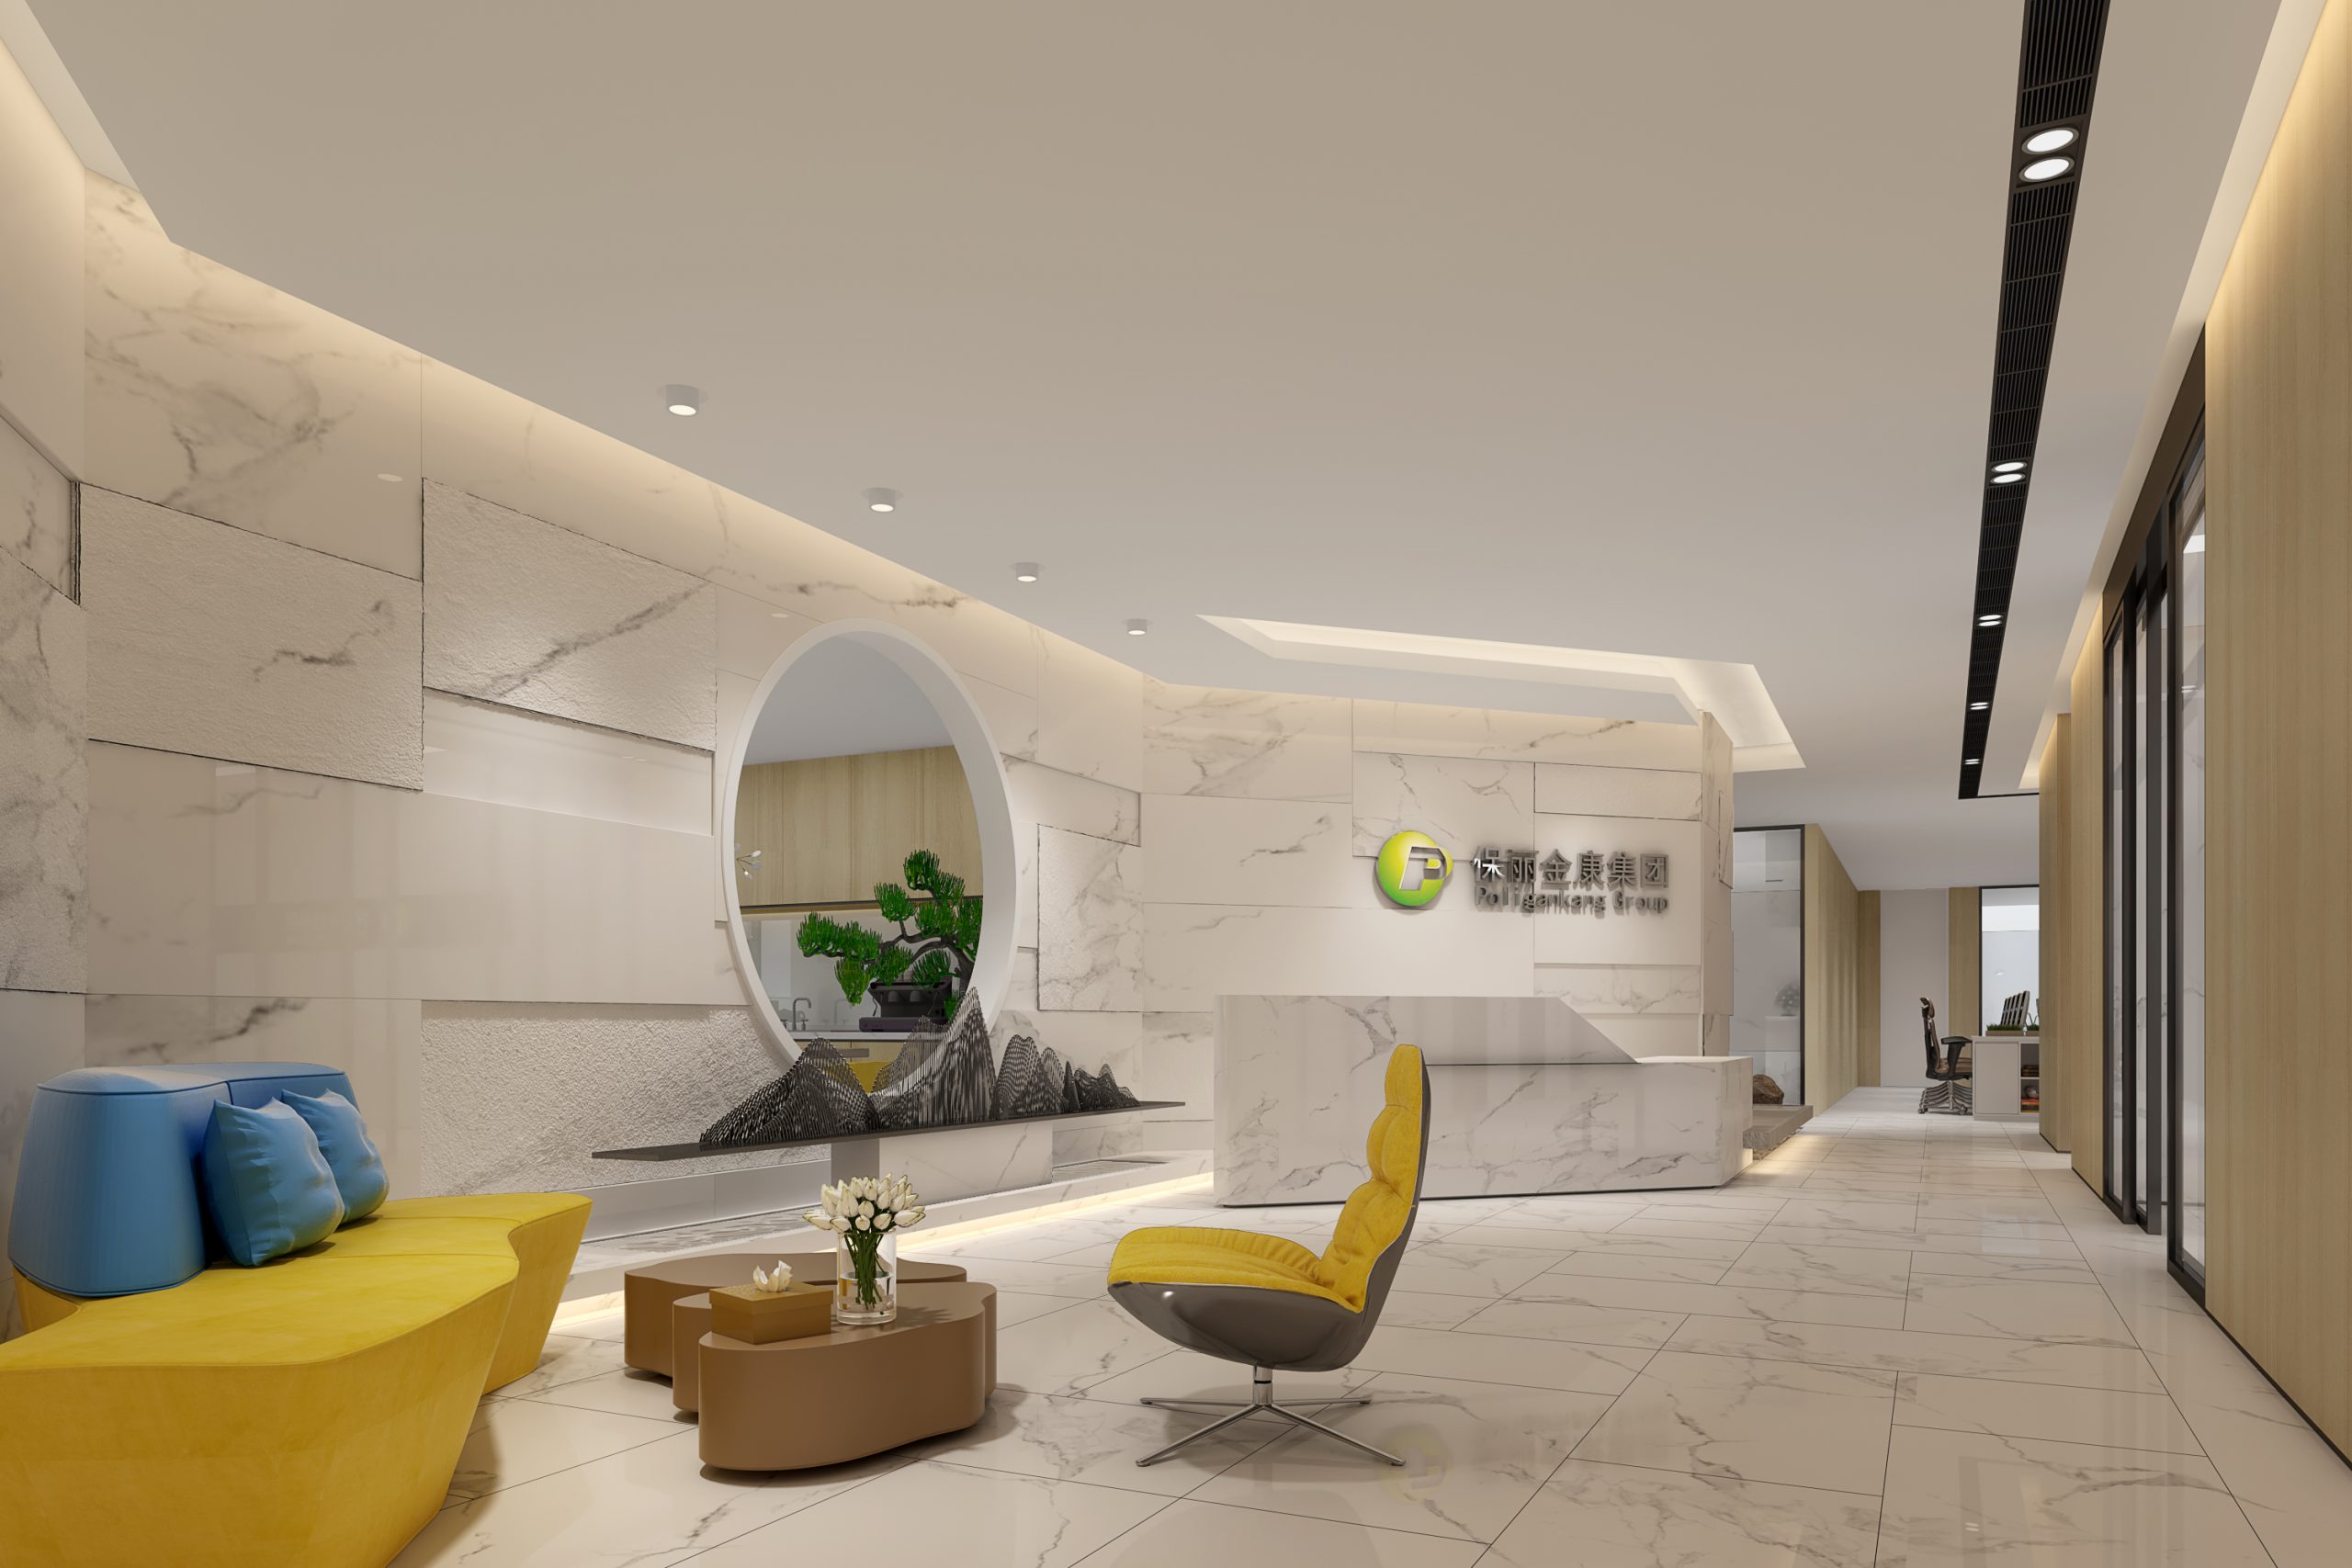 Companys front desk renderings:The original company’s front desk should be designed like this! I only know…